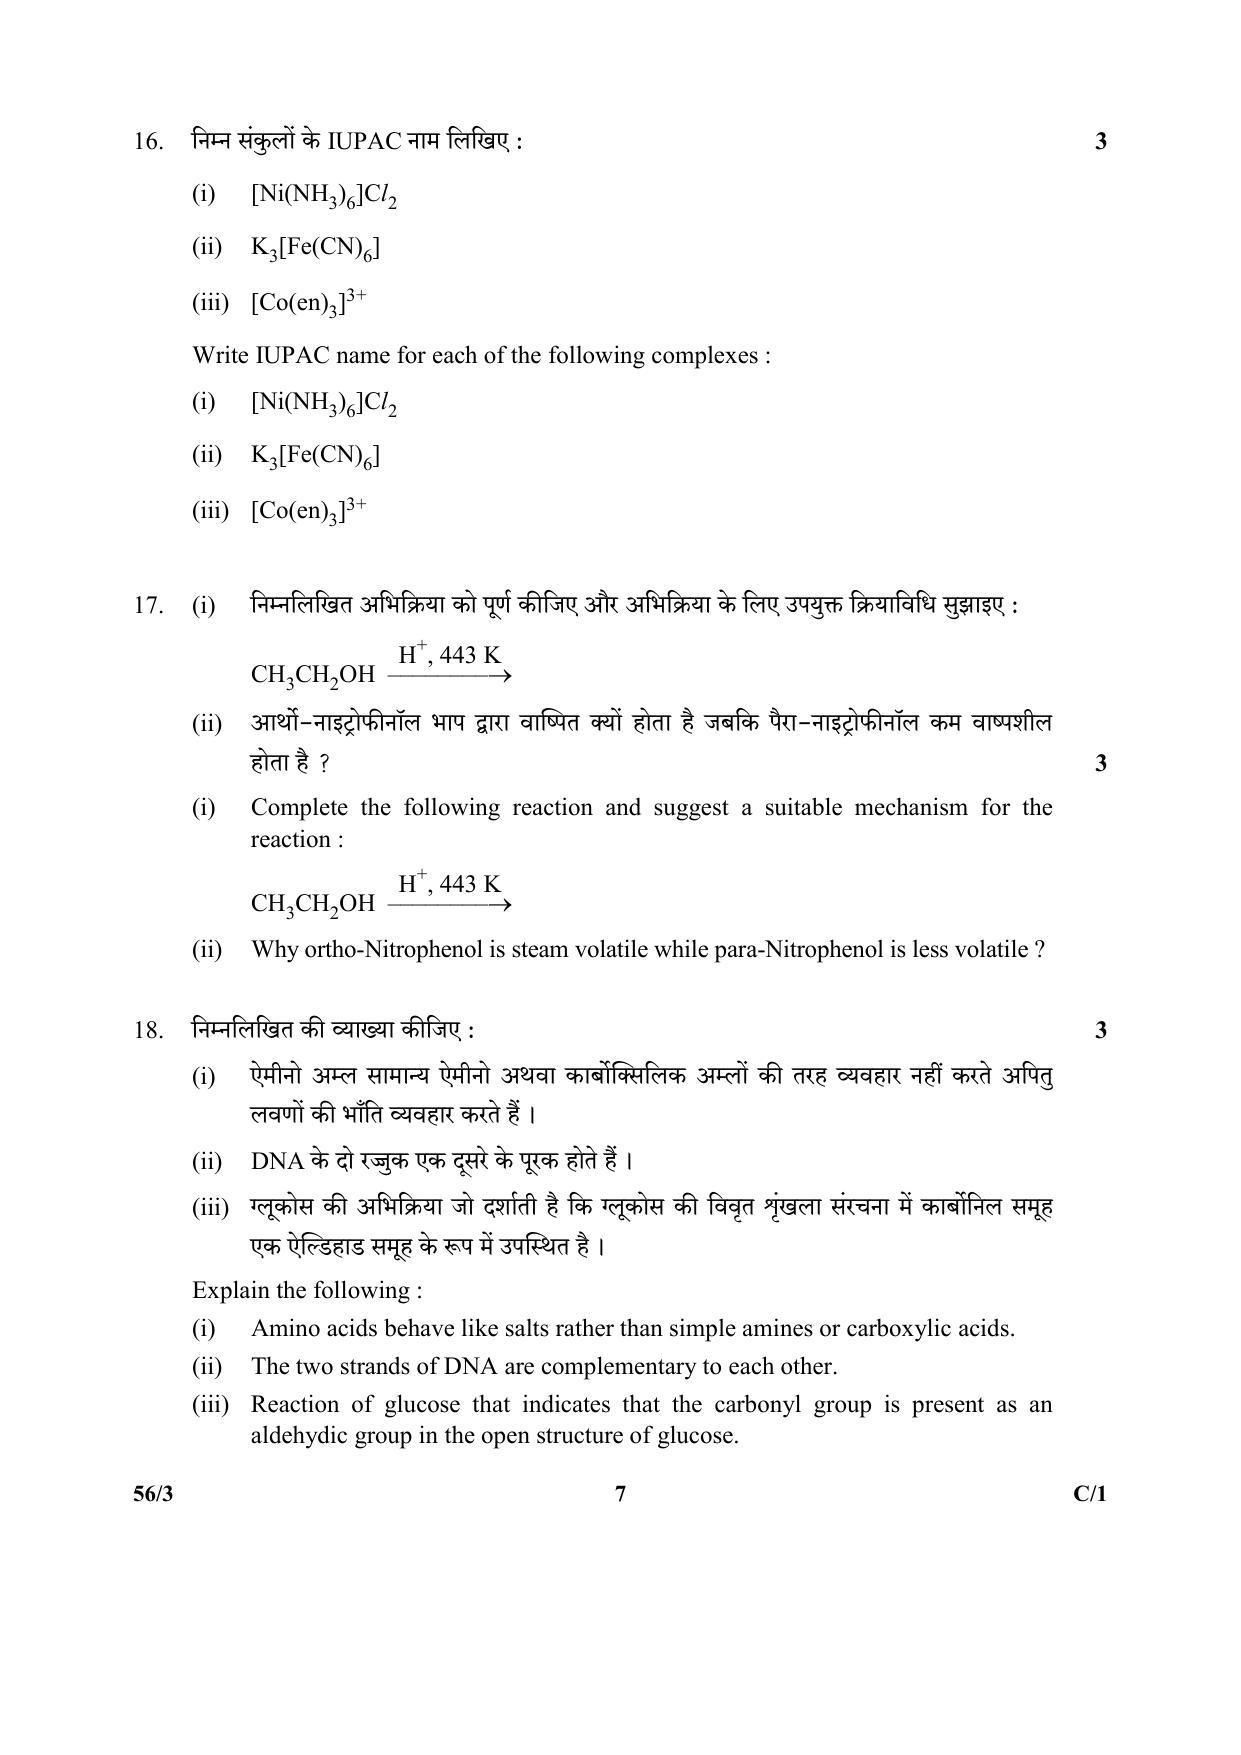 CBSE Class 12 56-3 (Chemistry) 2018 Compartment Question Paper - Page 7